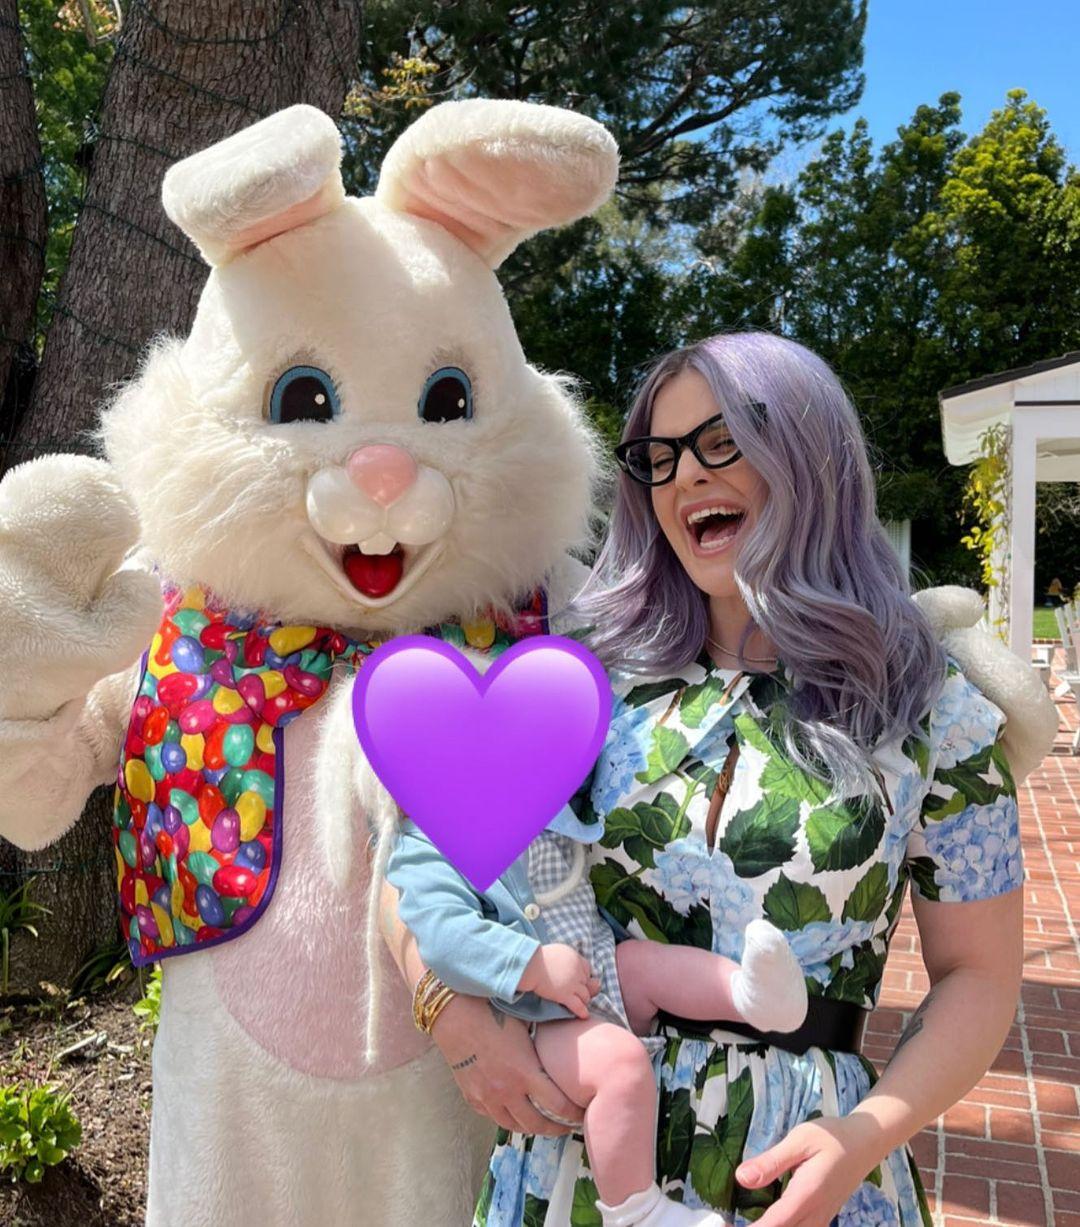 Kelly Osbourne's son is ready for Easter